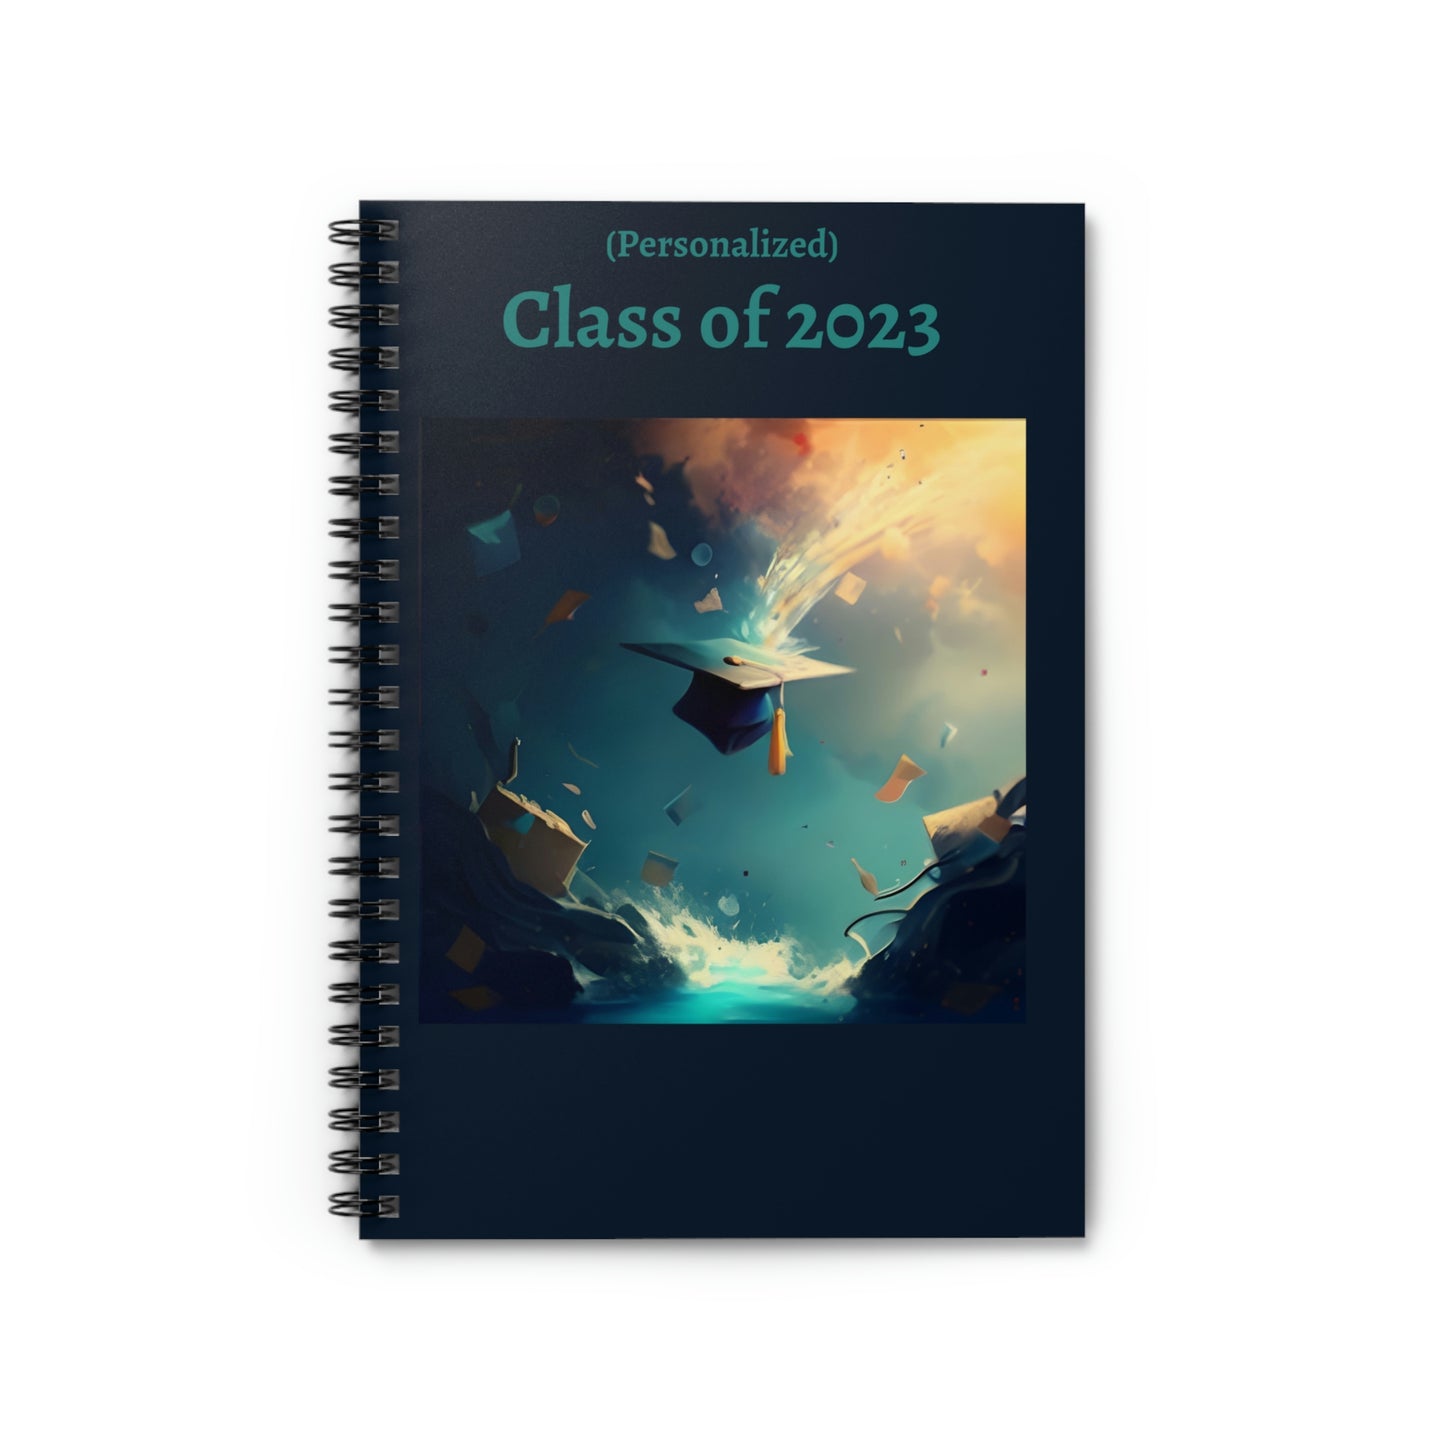 Class of 2023 Graduate Journal - Ruled Line (Cap and Blues) - (PERSONALIZED)